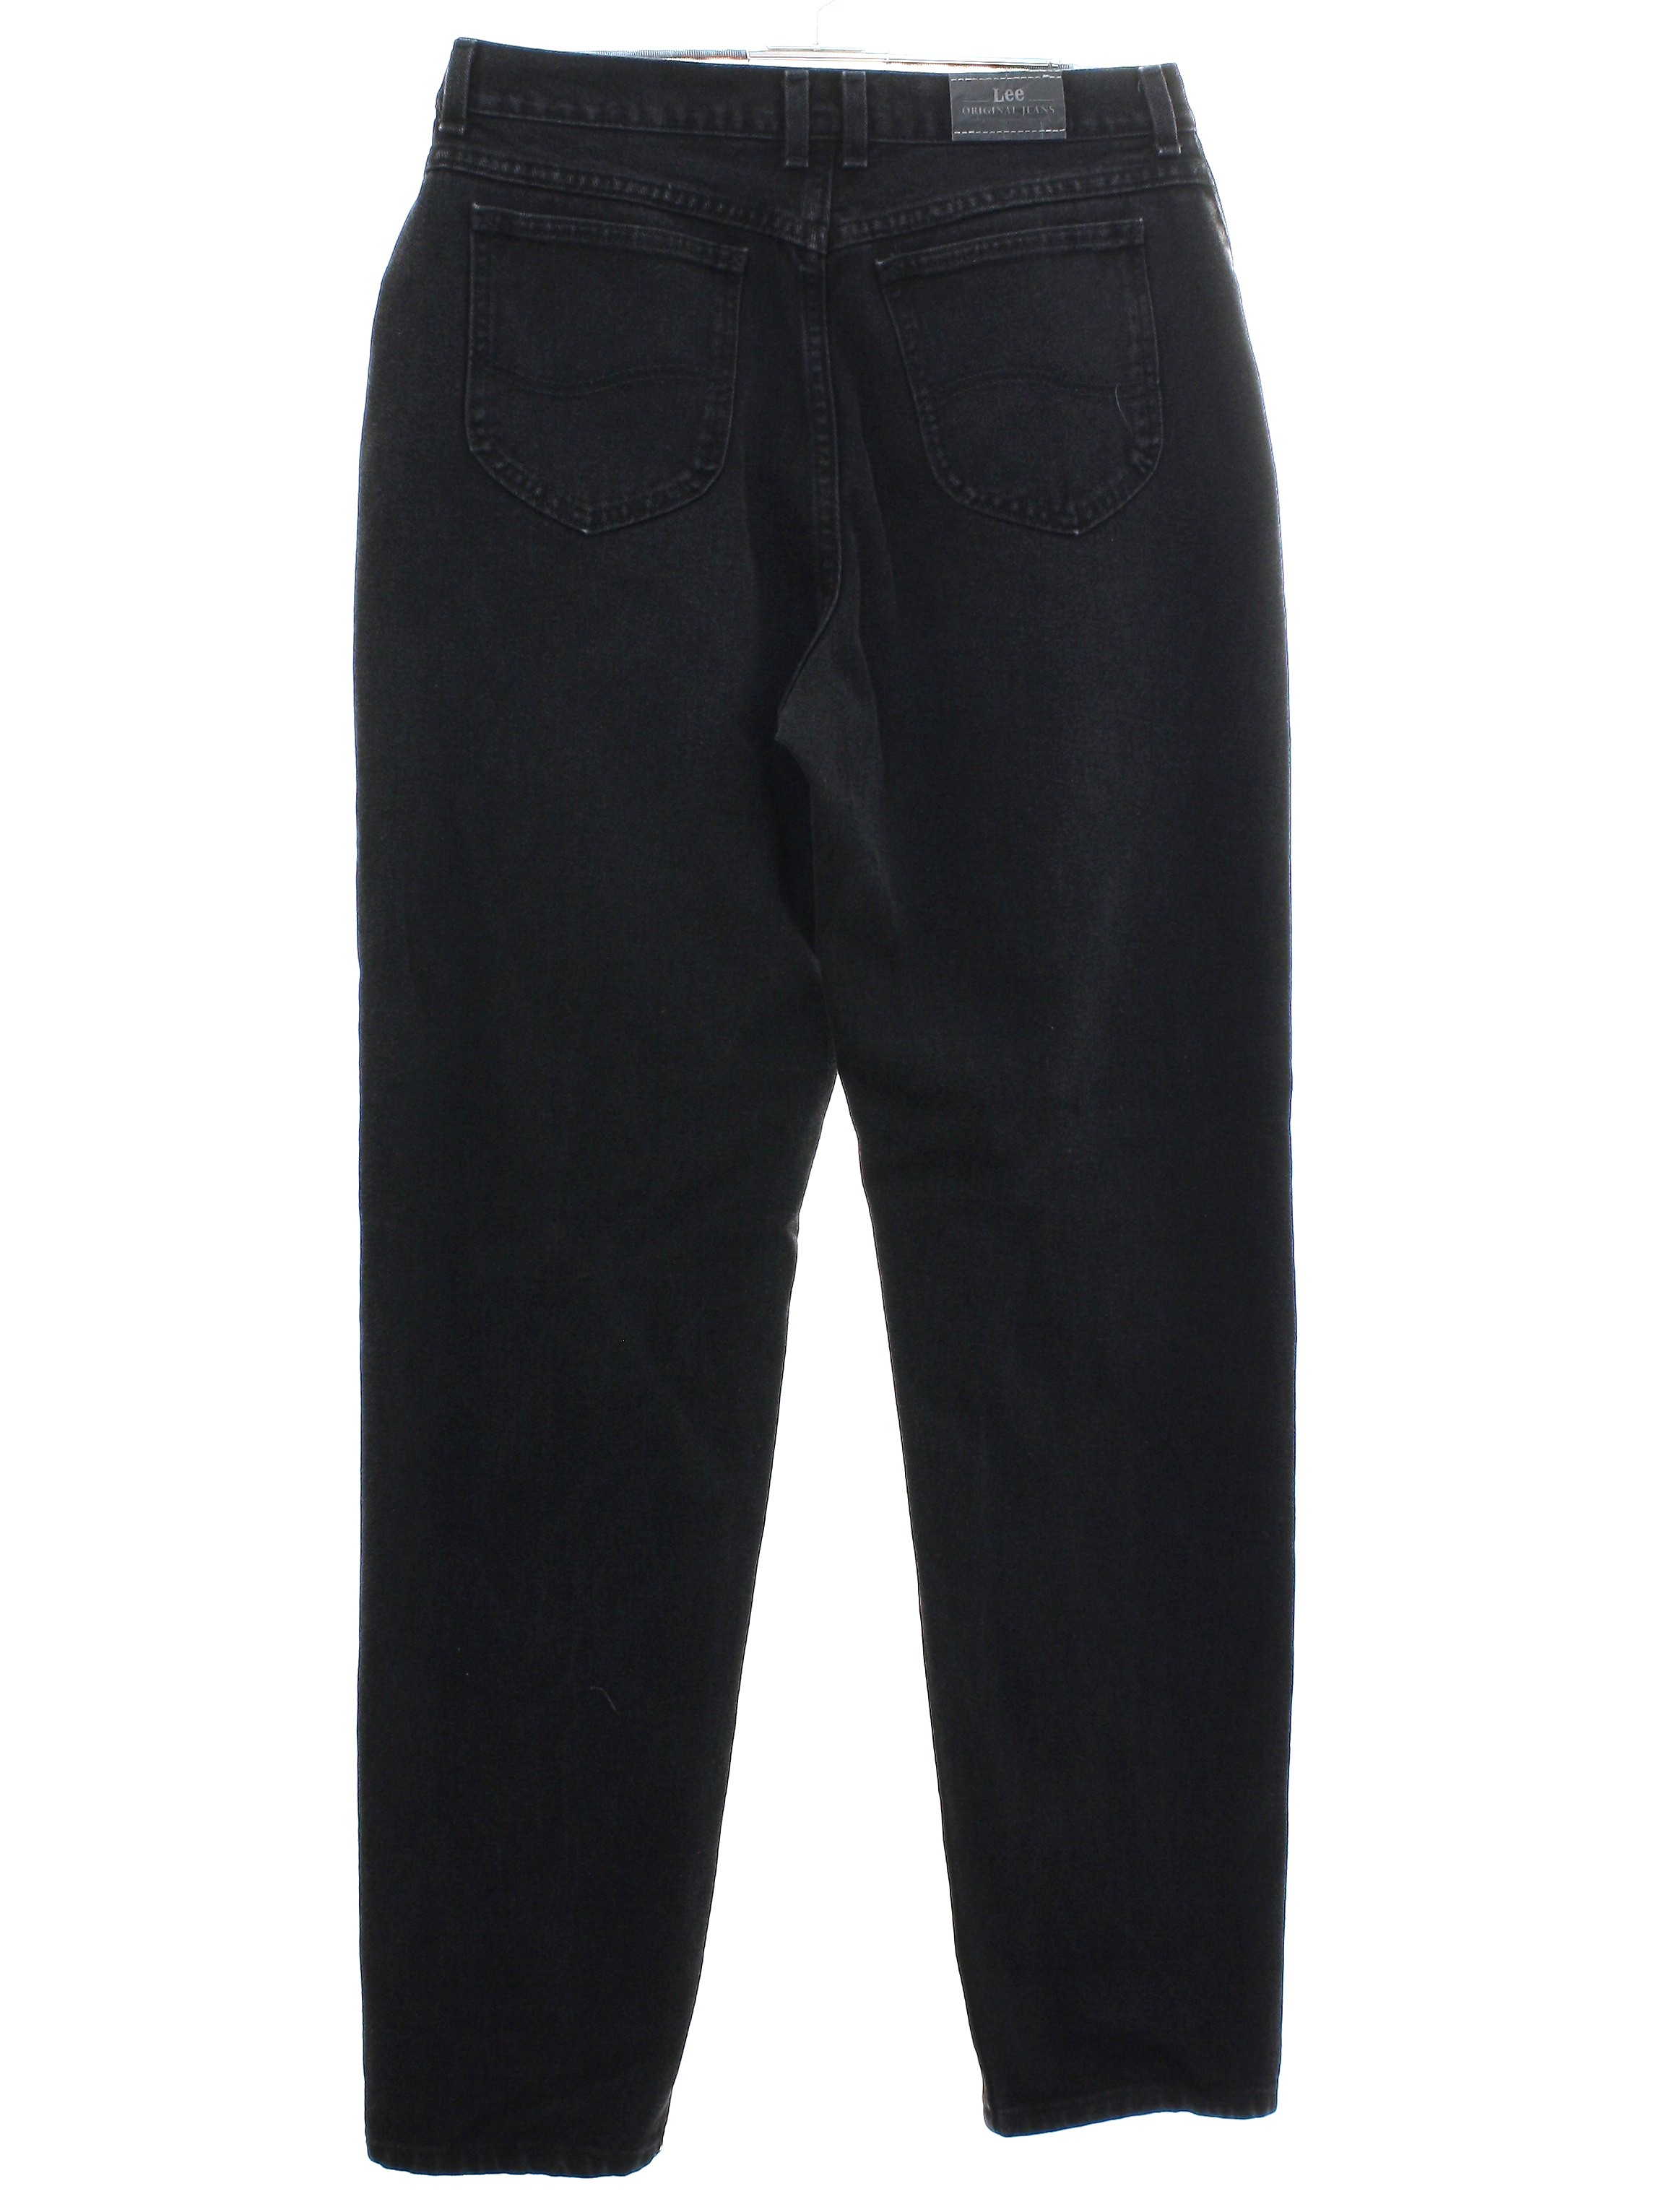 Retro 90s Pants (Lee) : 90s or newer -Lee- Womens slightly faded black ...